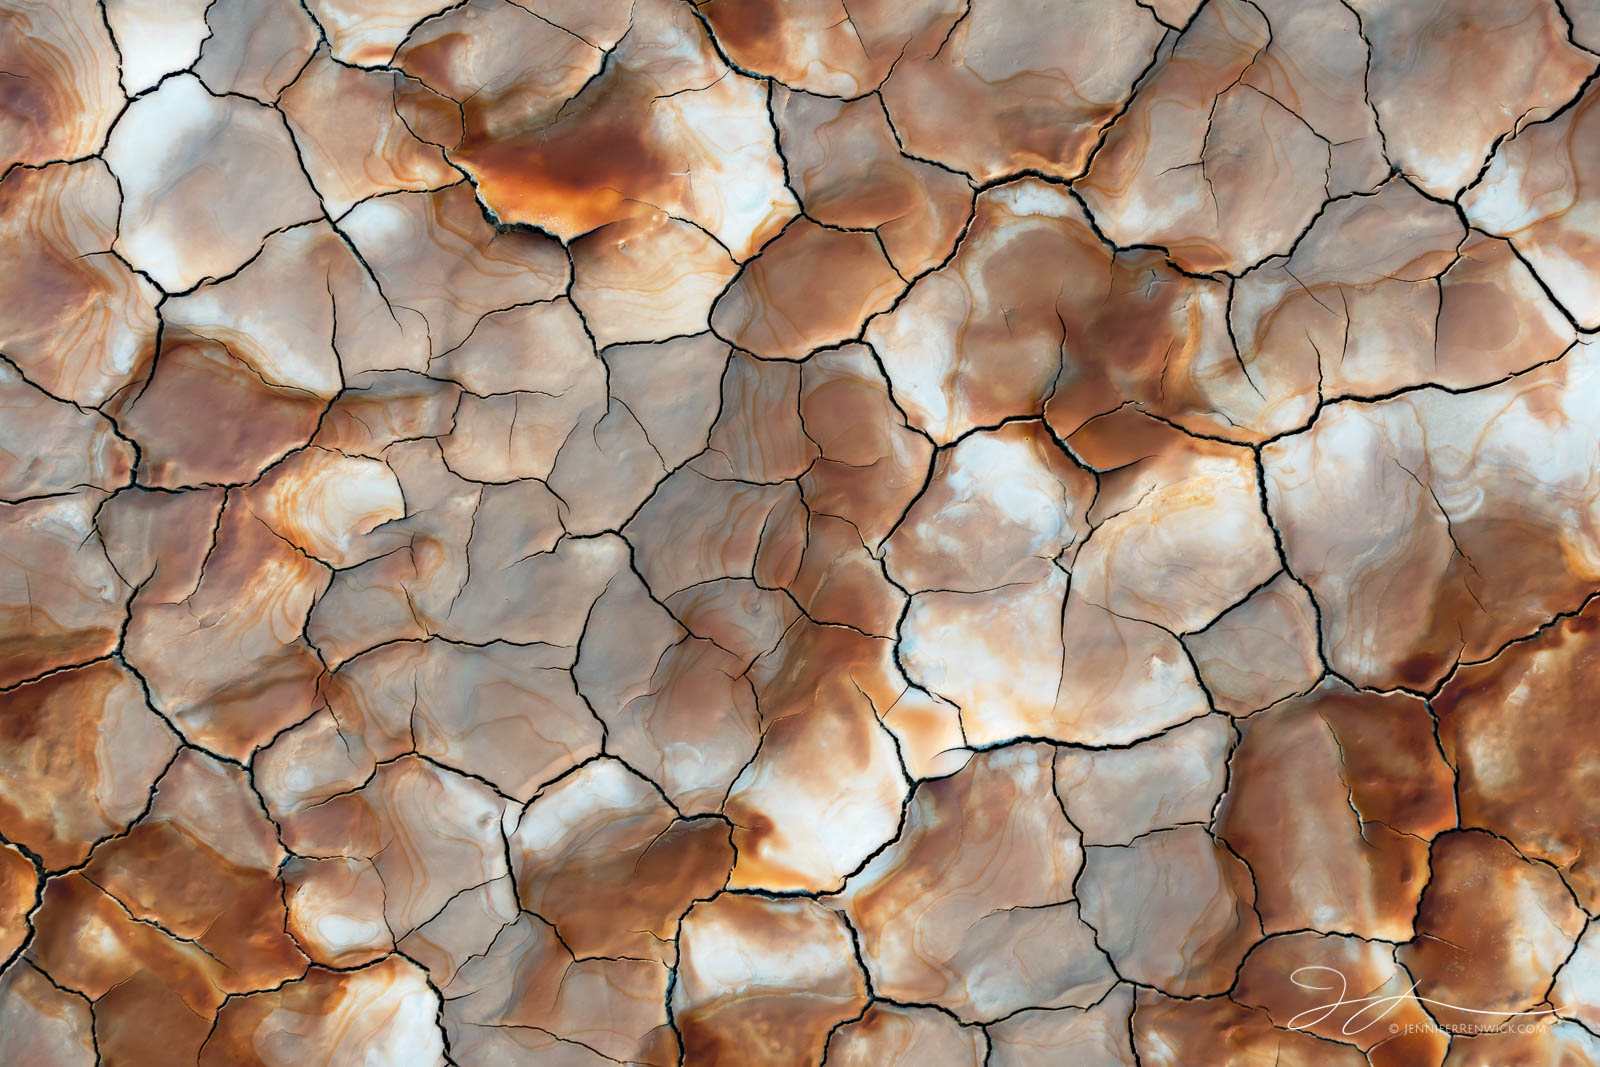 Colors swirl together to create a pattern in some smooth mud cracks on the desert floor.